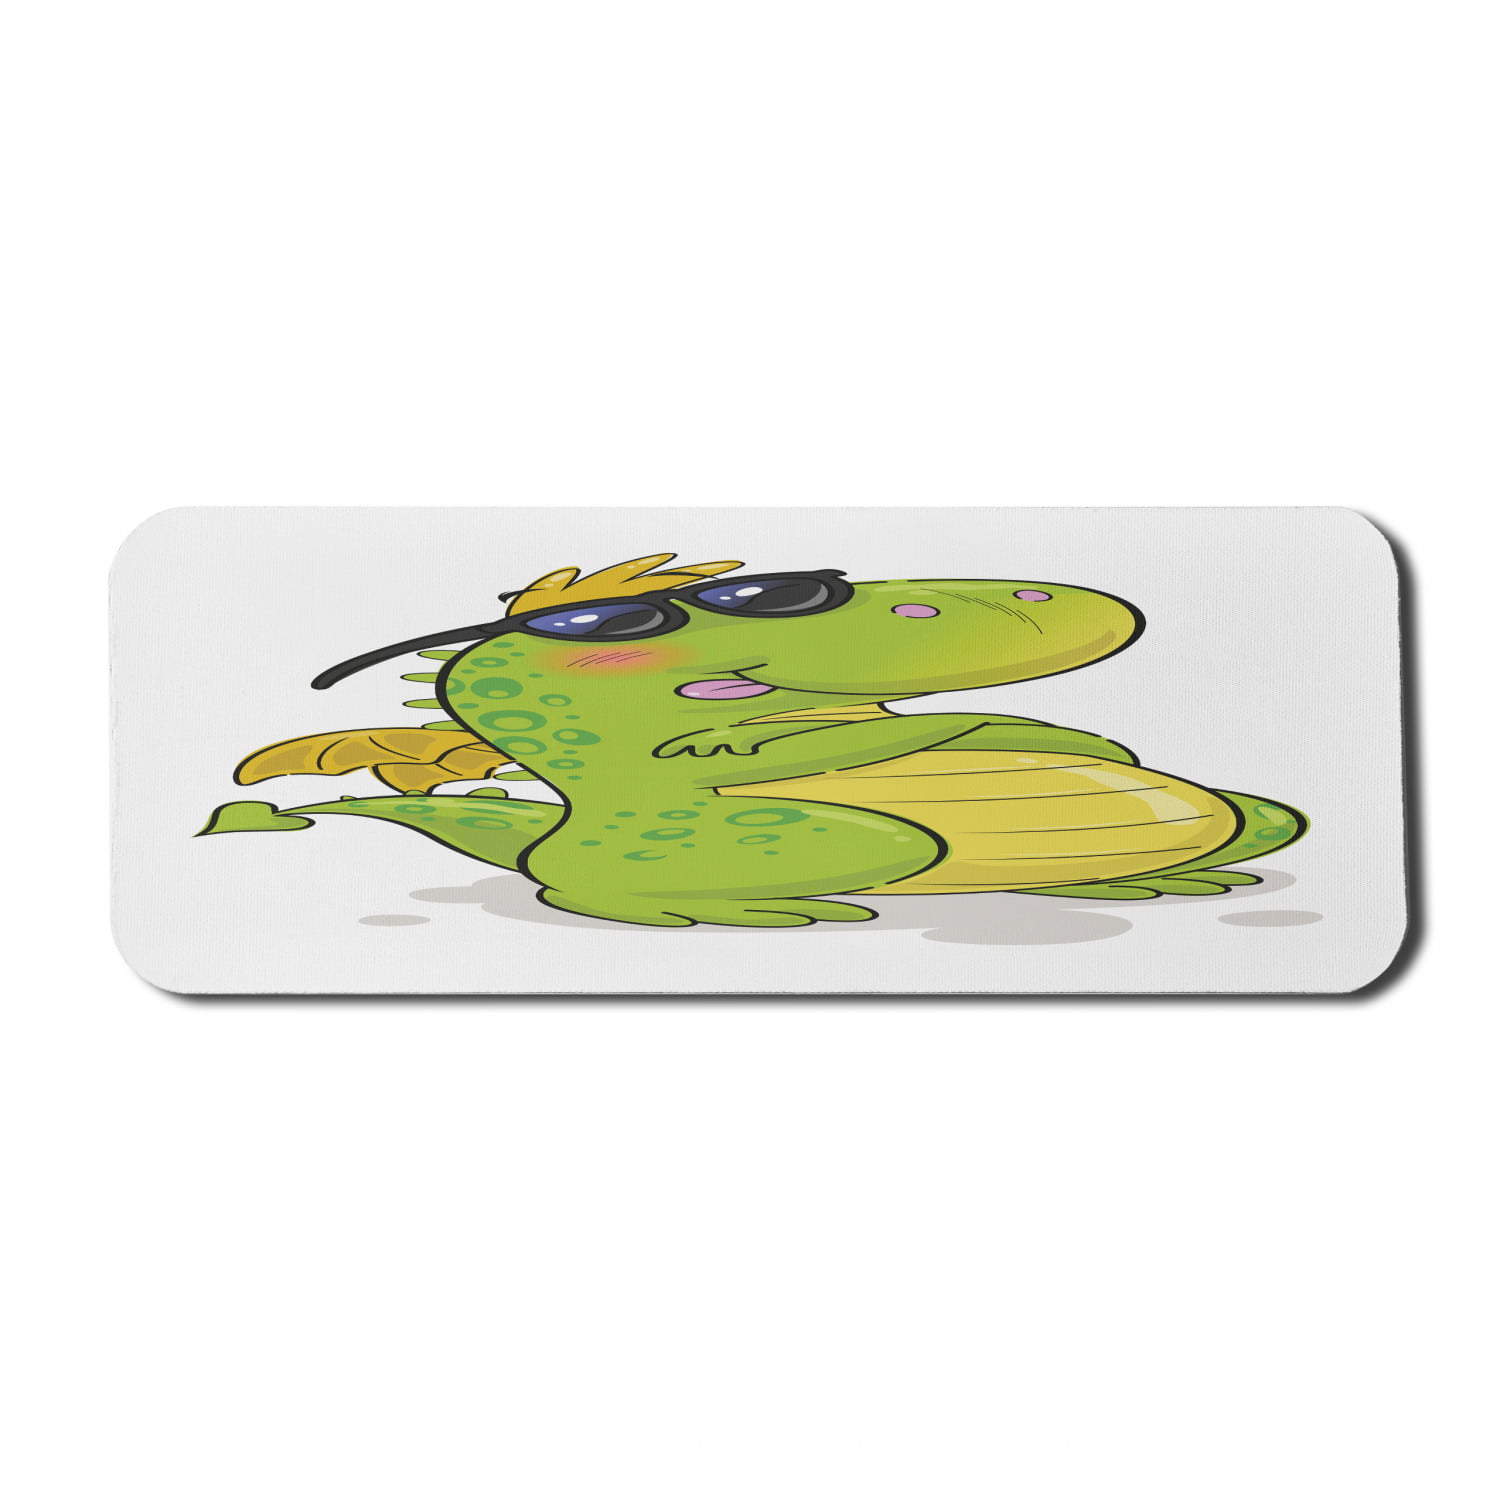 Pad & Coaster Groovy Cool Sunflower Wearing Sunglasses Mouse Mat